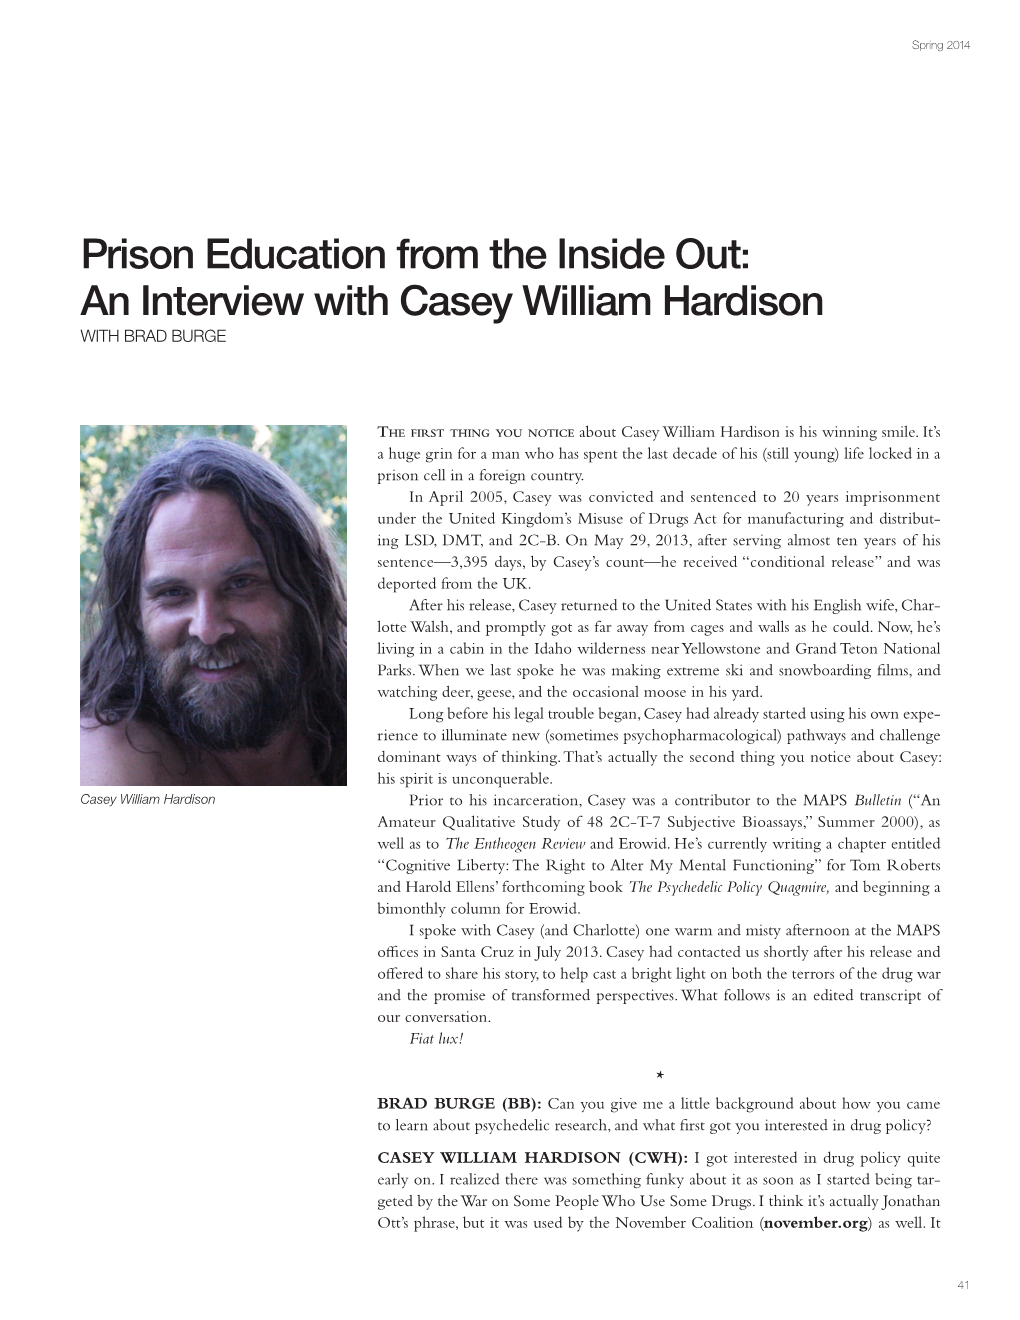 An Interview with Casey William Hardison with BRAD BURGE